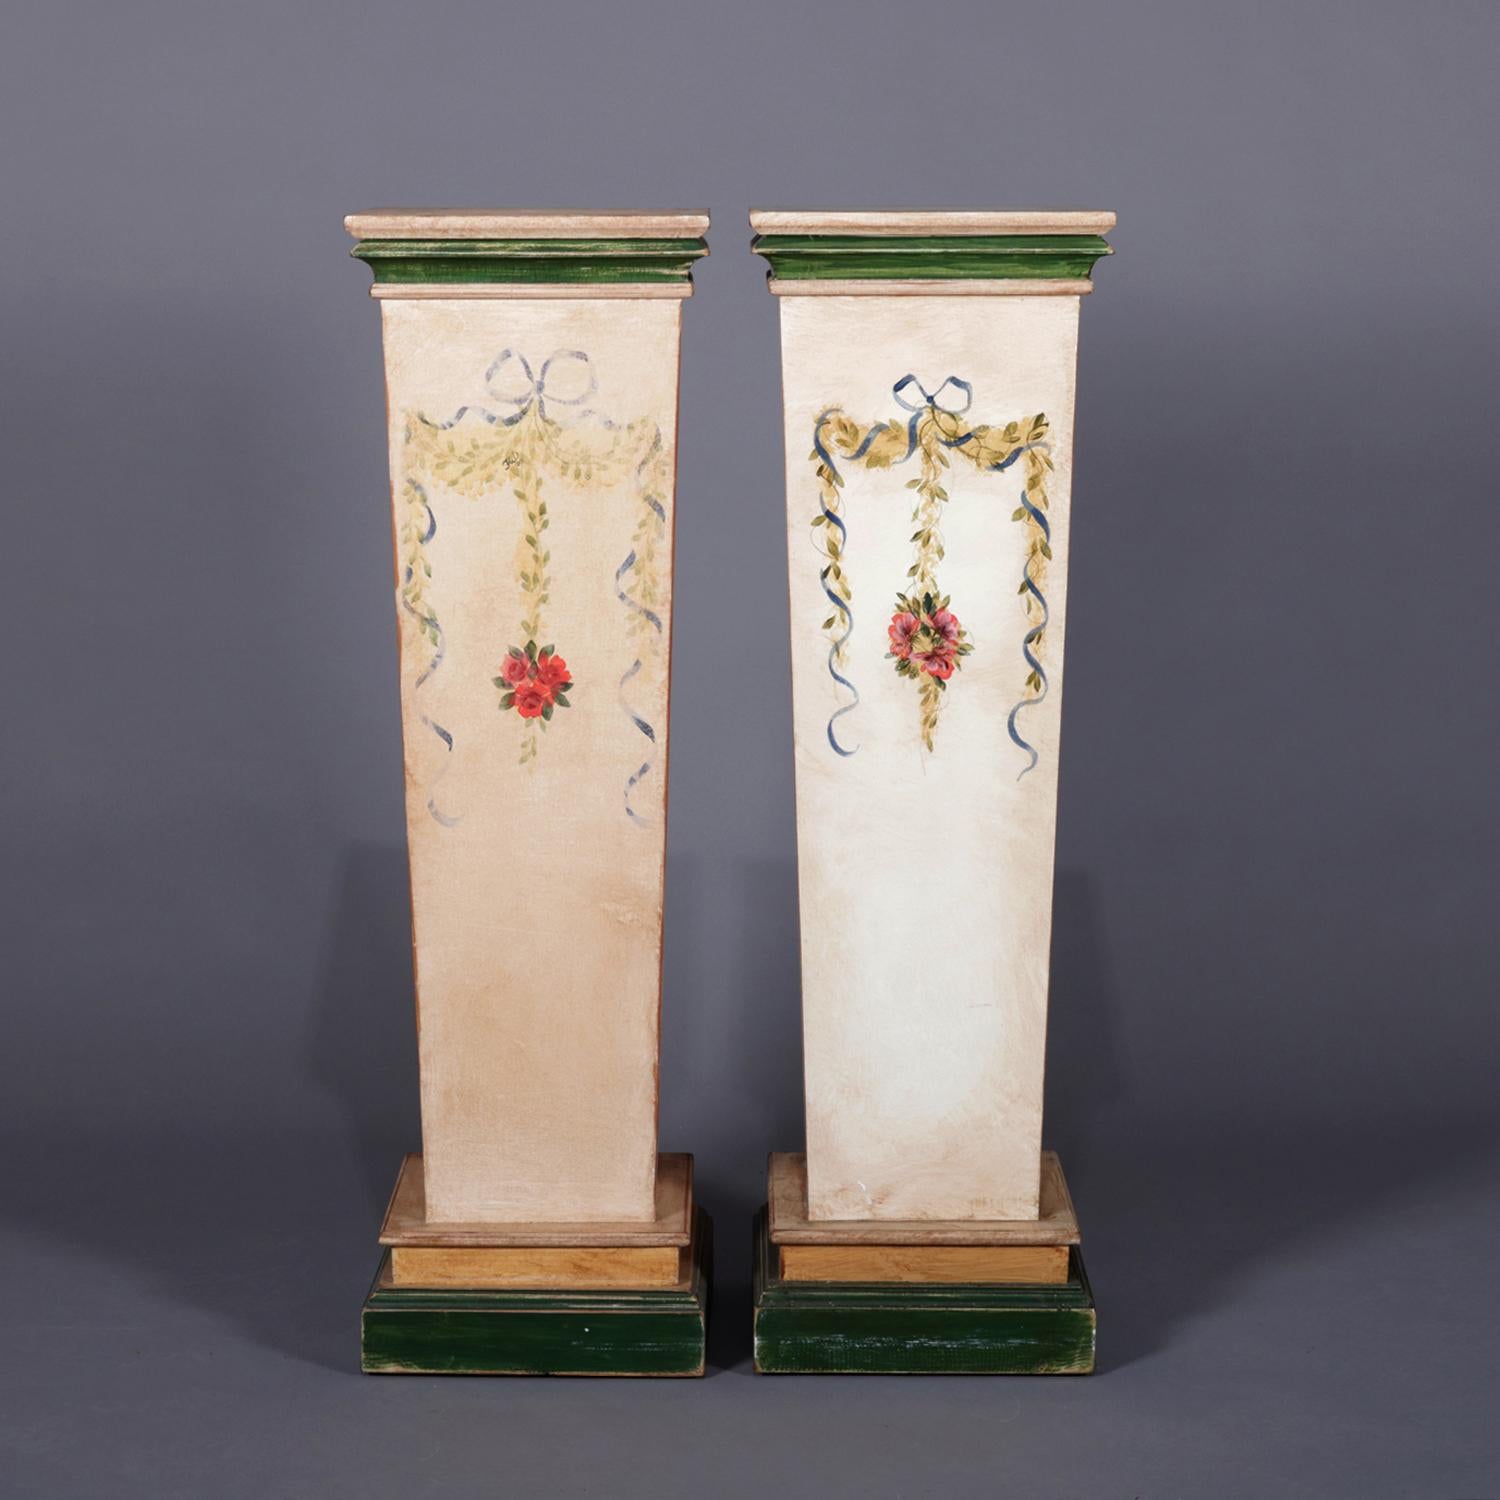 Pair of French Provincial sculpture display pedestals feature square and flared form hand painted with ribbon, floral and garland decoration, 20th century.

Measures: 40